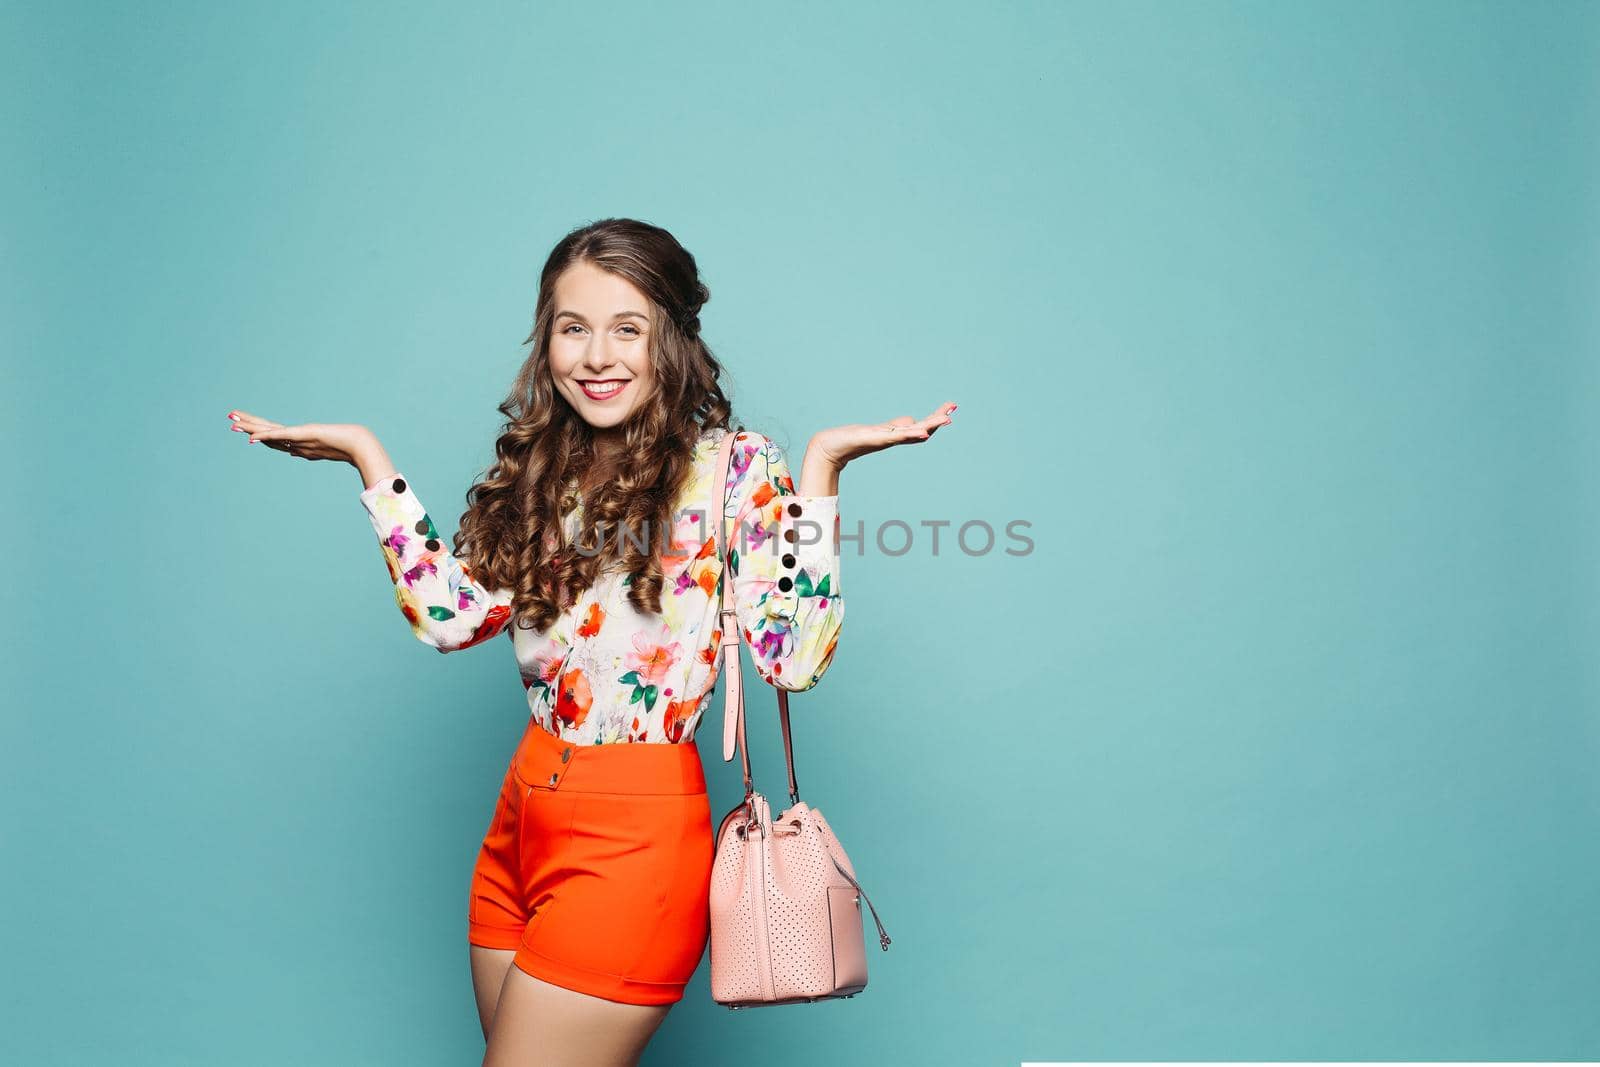 Studio portrait of attractive woman with curly hair wearing floral shirt with red shorts and carrying bag demonstrating two objects over green background. Isolate.